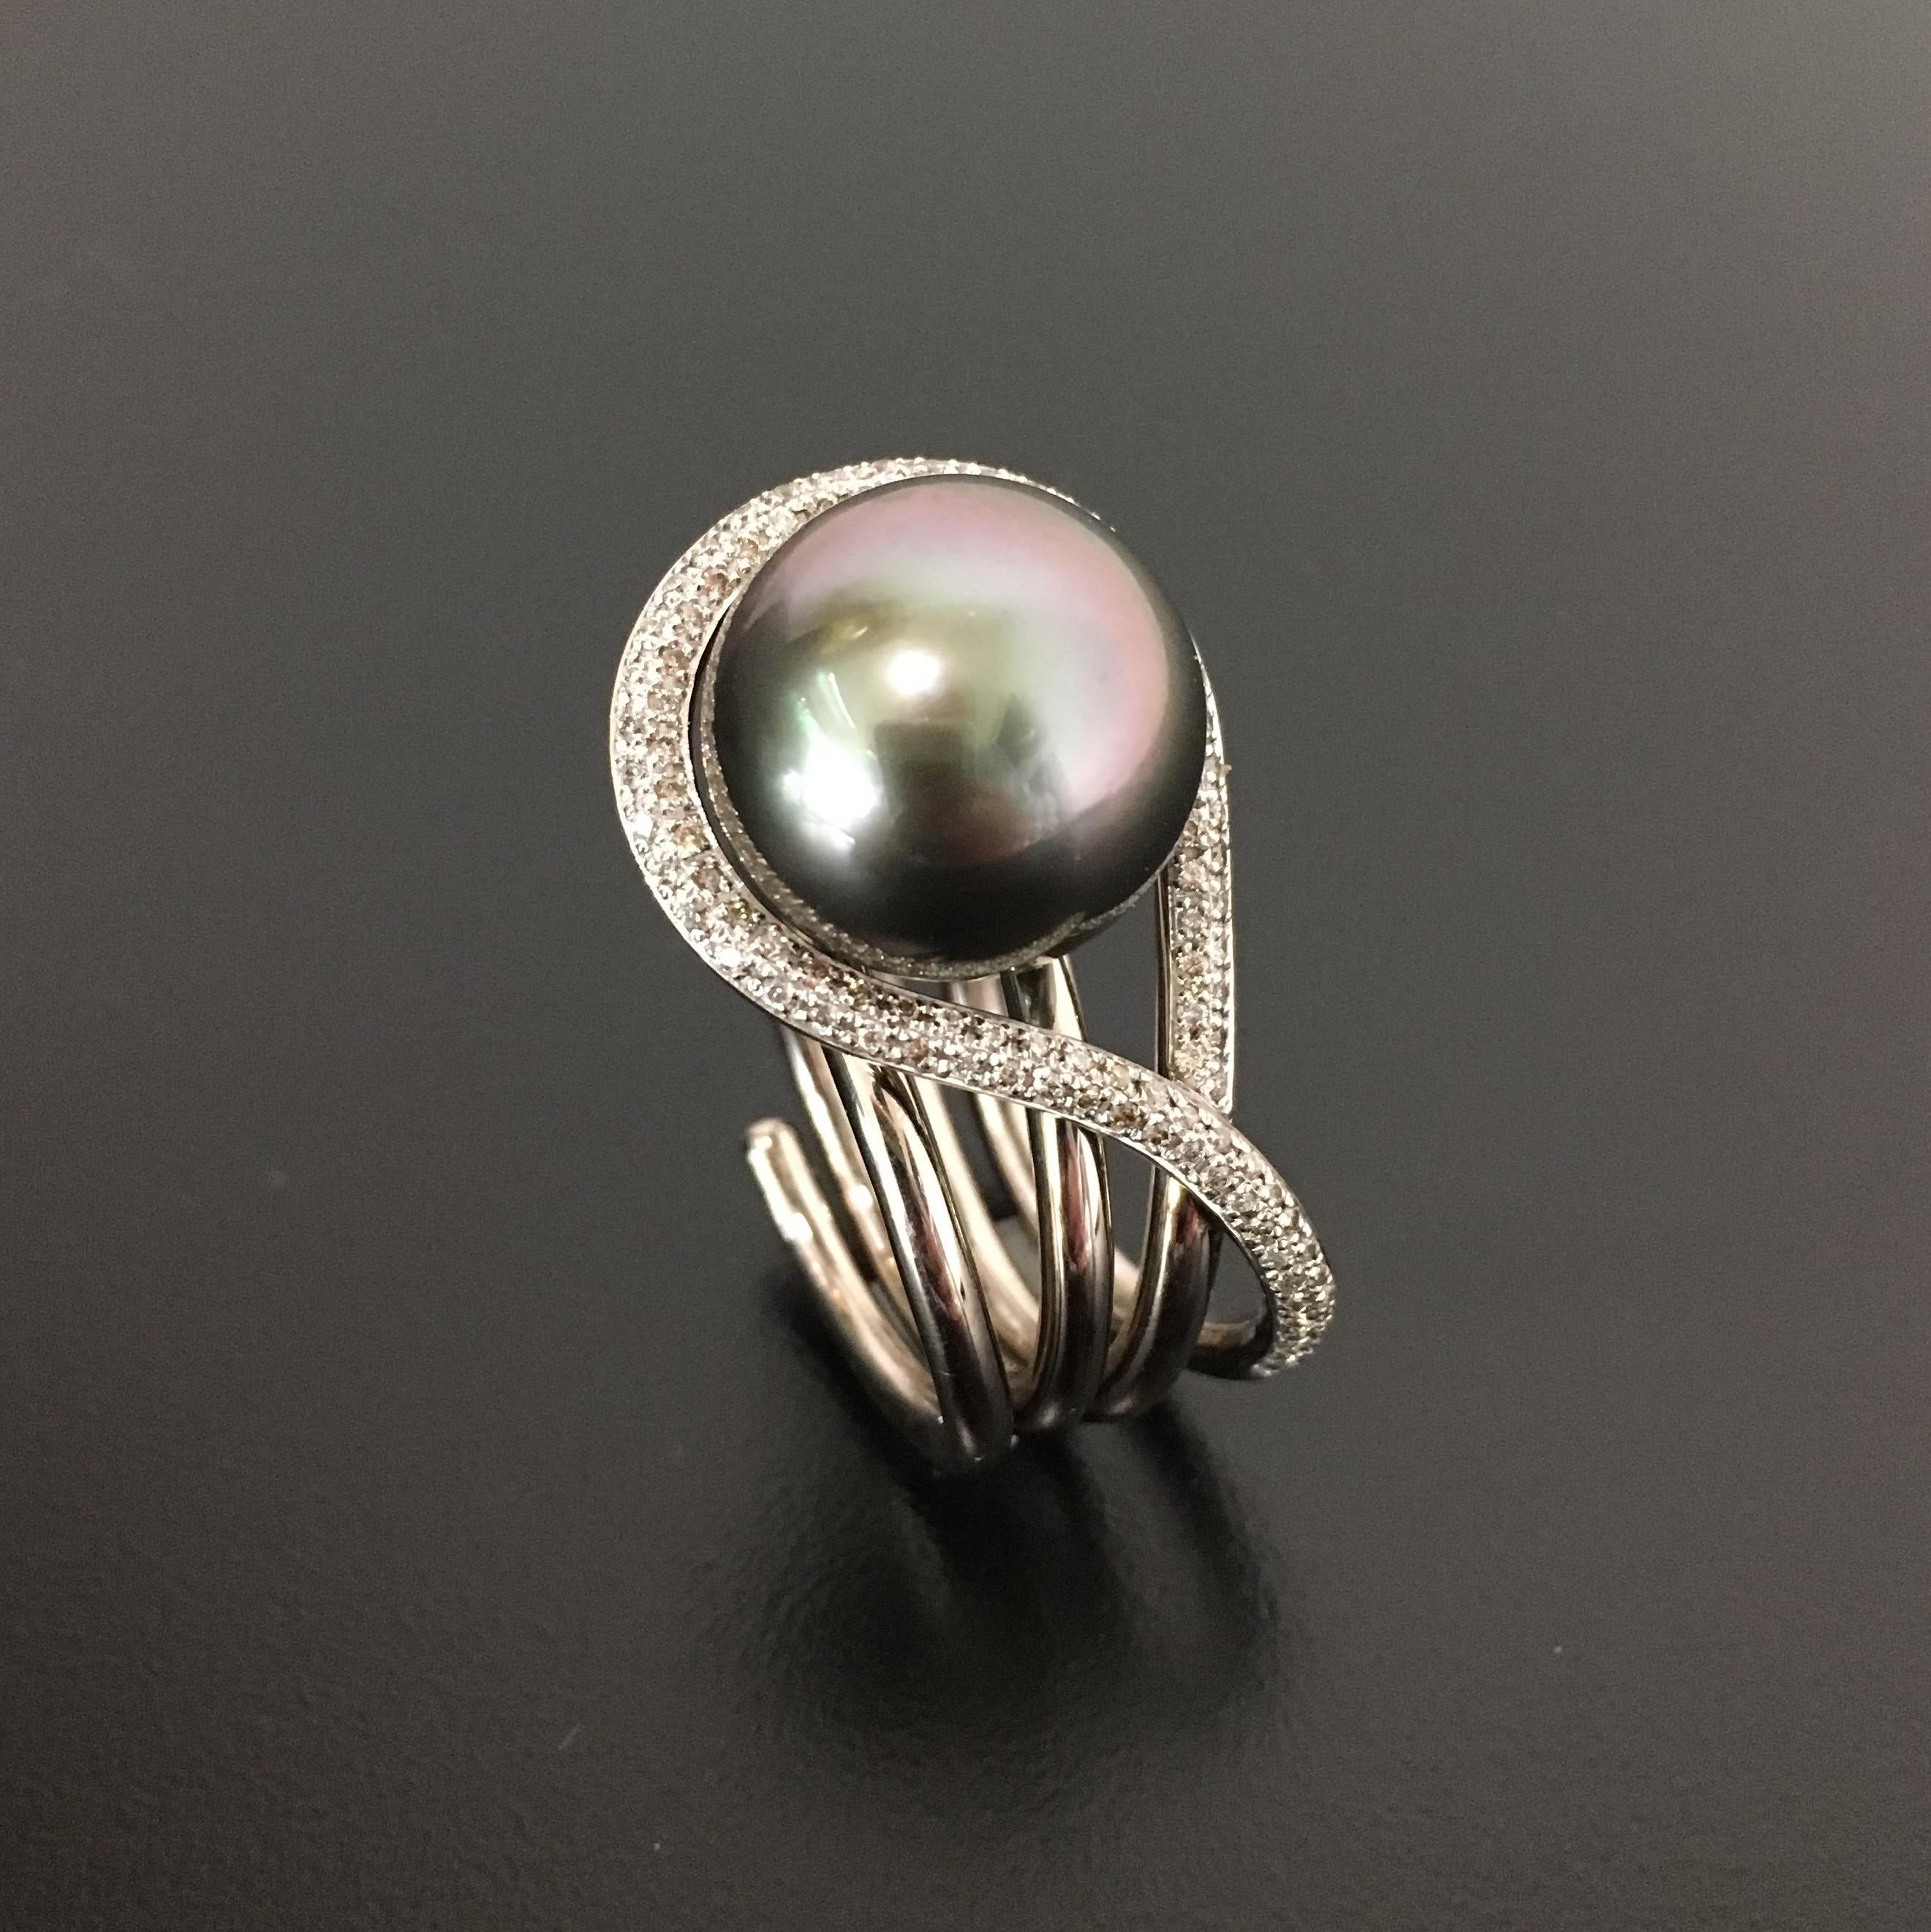 Smooth, curvy, big look but not bulky
A very elegant Ring with a real big Tahitian Culture Pearl, greyish color with pinkish
tone
18 Karat Whitegold with 106 fine diamonds in top top light brown color / si, 0,53 ct.